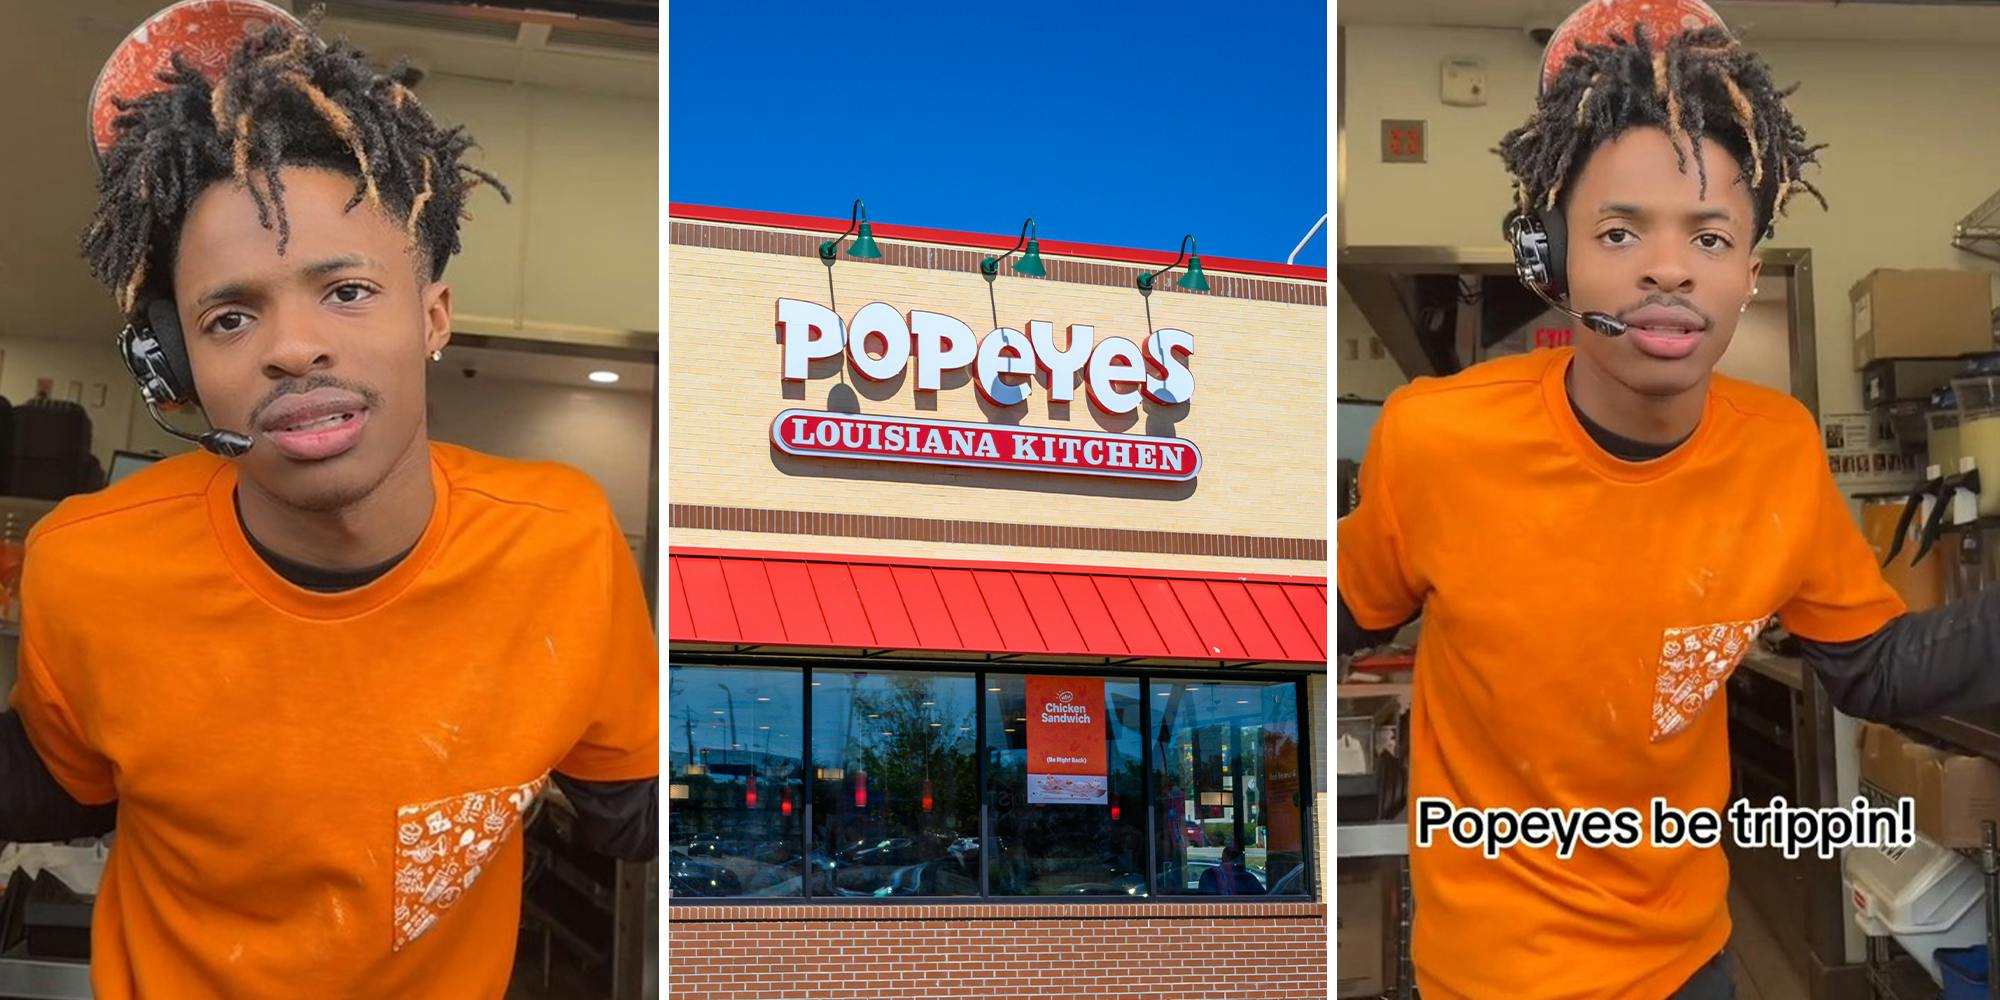 ‘You’re scaring me, ma’am’: Jobseeker tries getting a job as a cook at Popeyes. It backfires